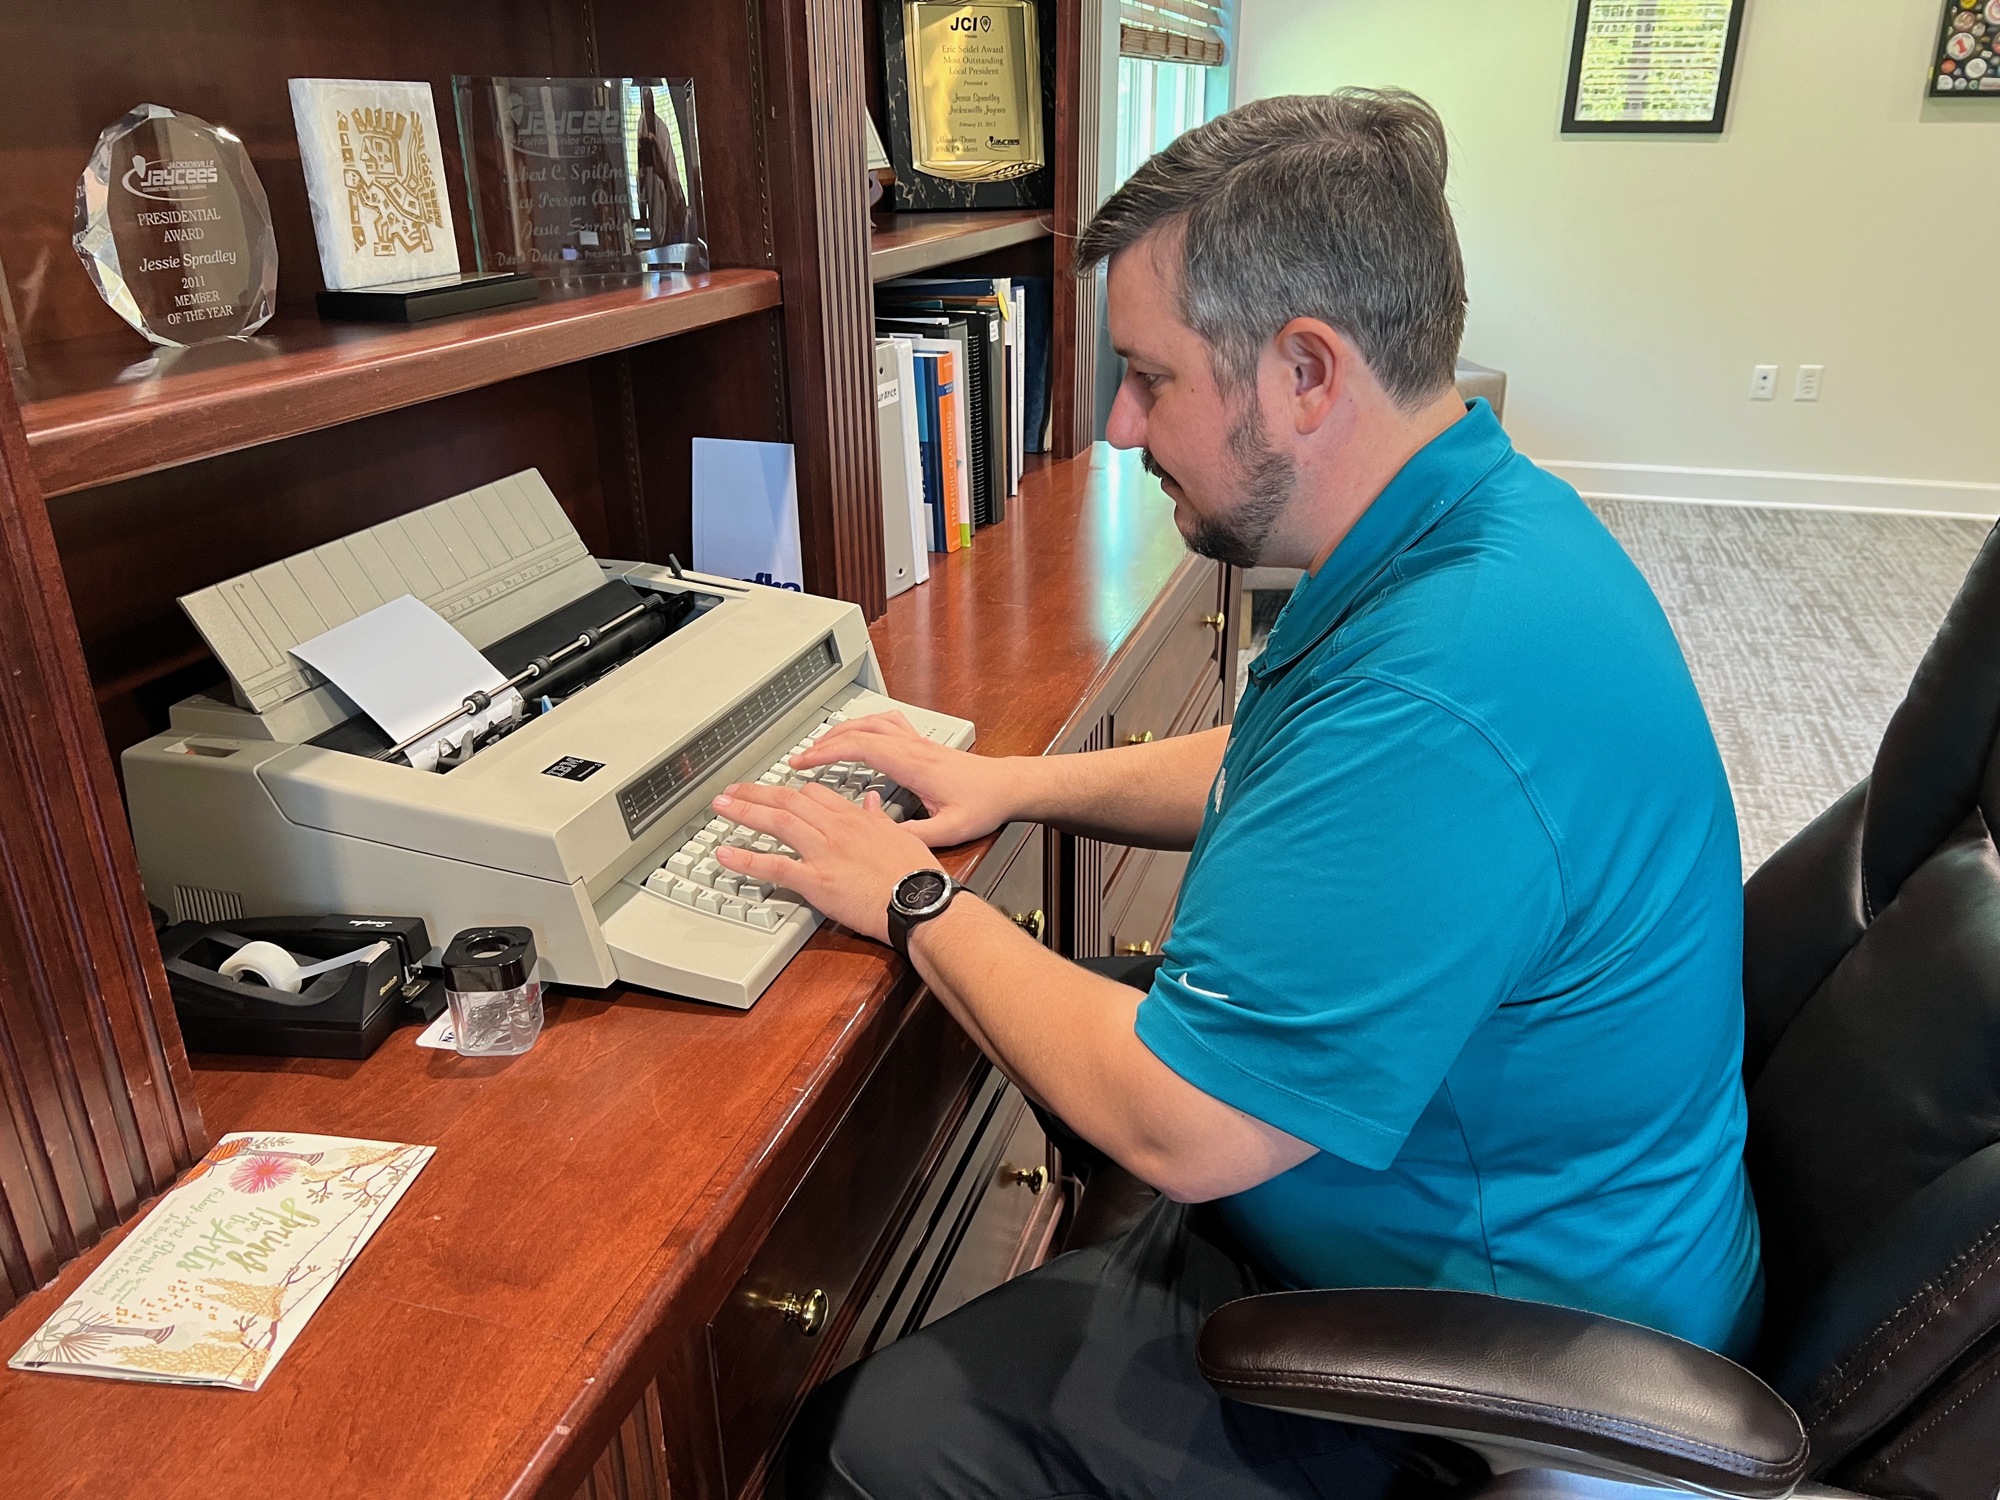 Jessie Spradley has an unusual piece of equipment in his NEFBA office – a typewriter. He prefers it to a word processor to send personal notes to members.